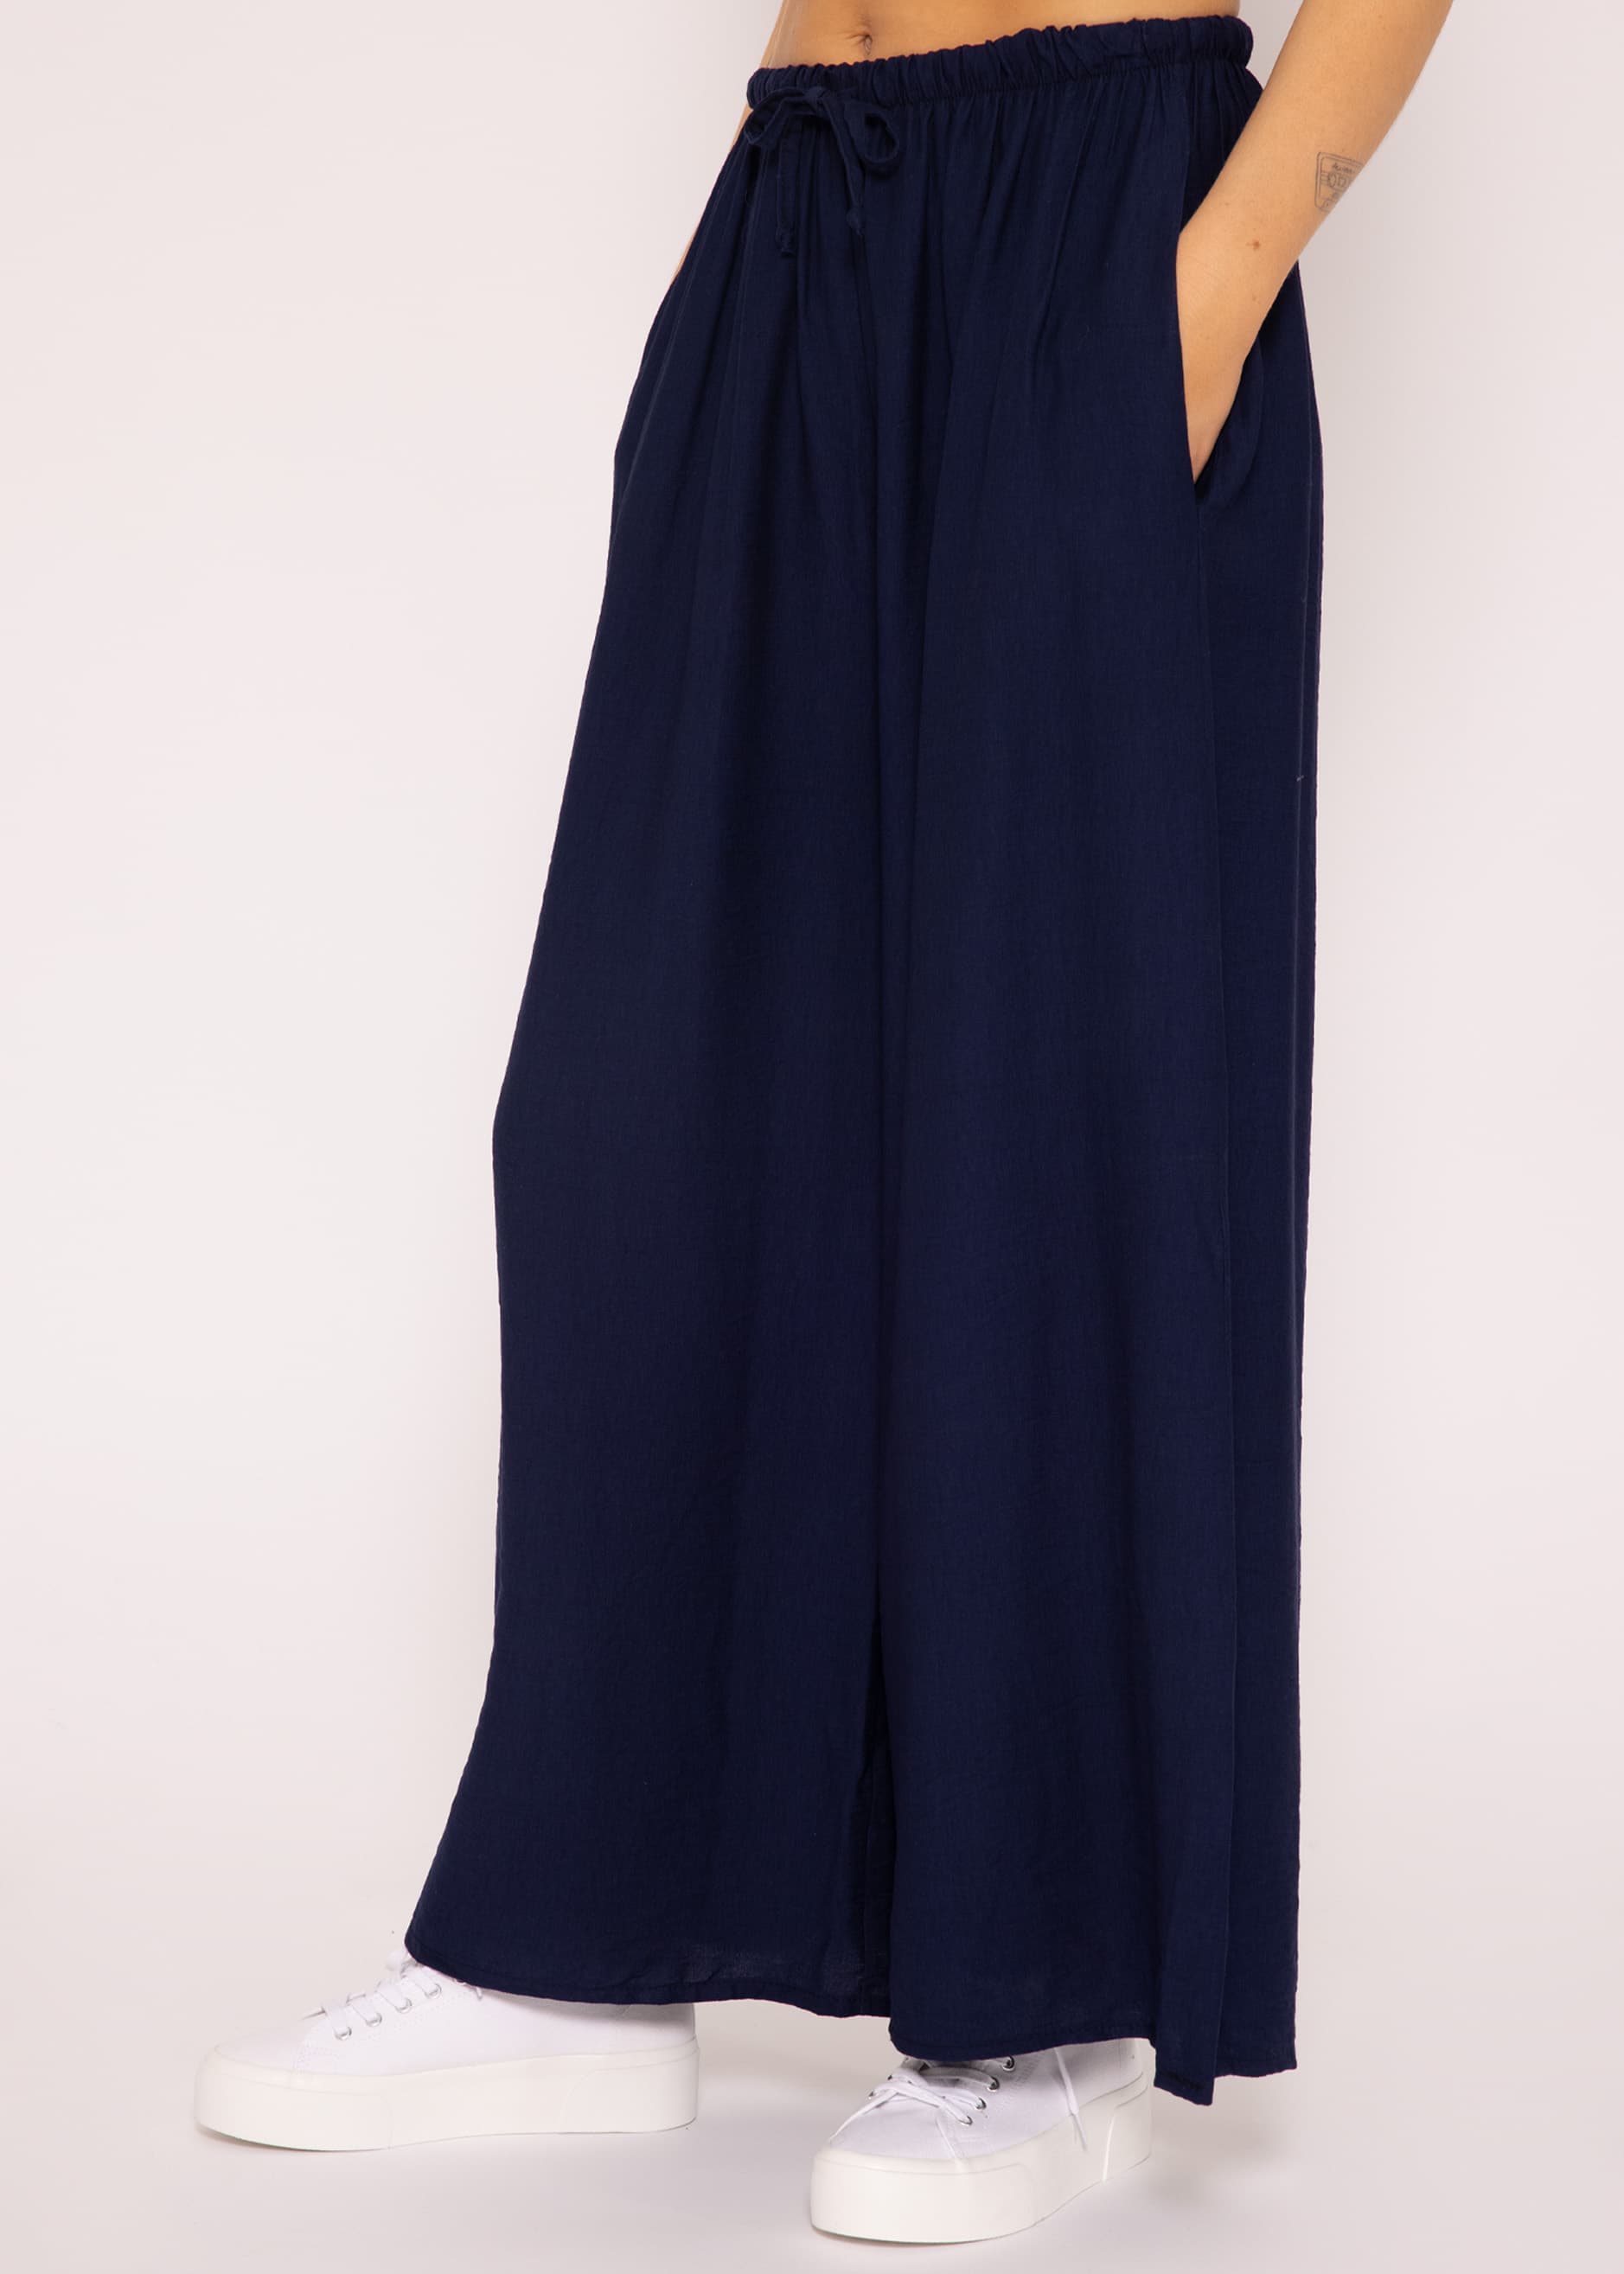 Buy JUNIPER Blue Solid Rayon Womens Wide Leg Palazzo Pants | Shoppers Stop